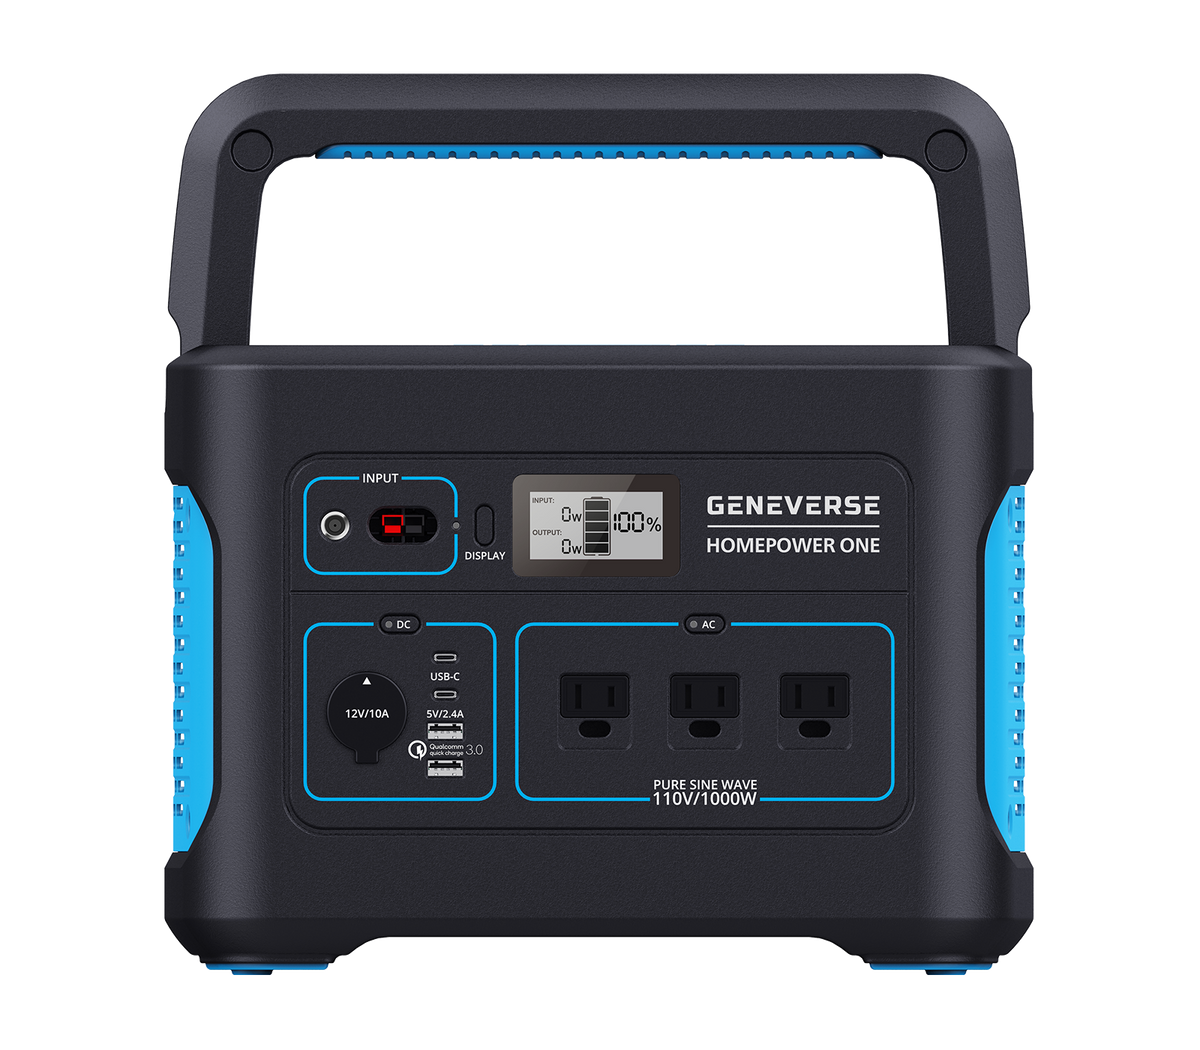 How long should I recharge my drill's batteries? - Home Improvement Stack  Exchange